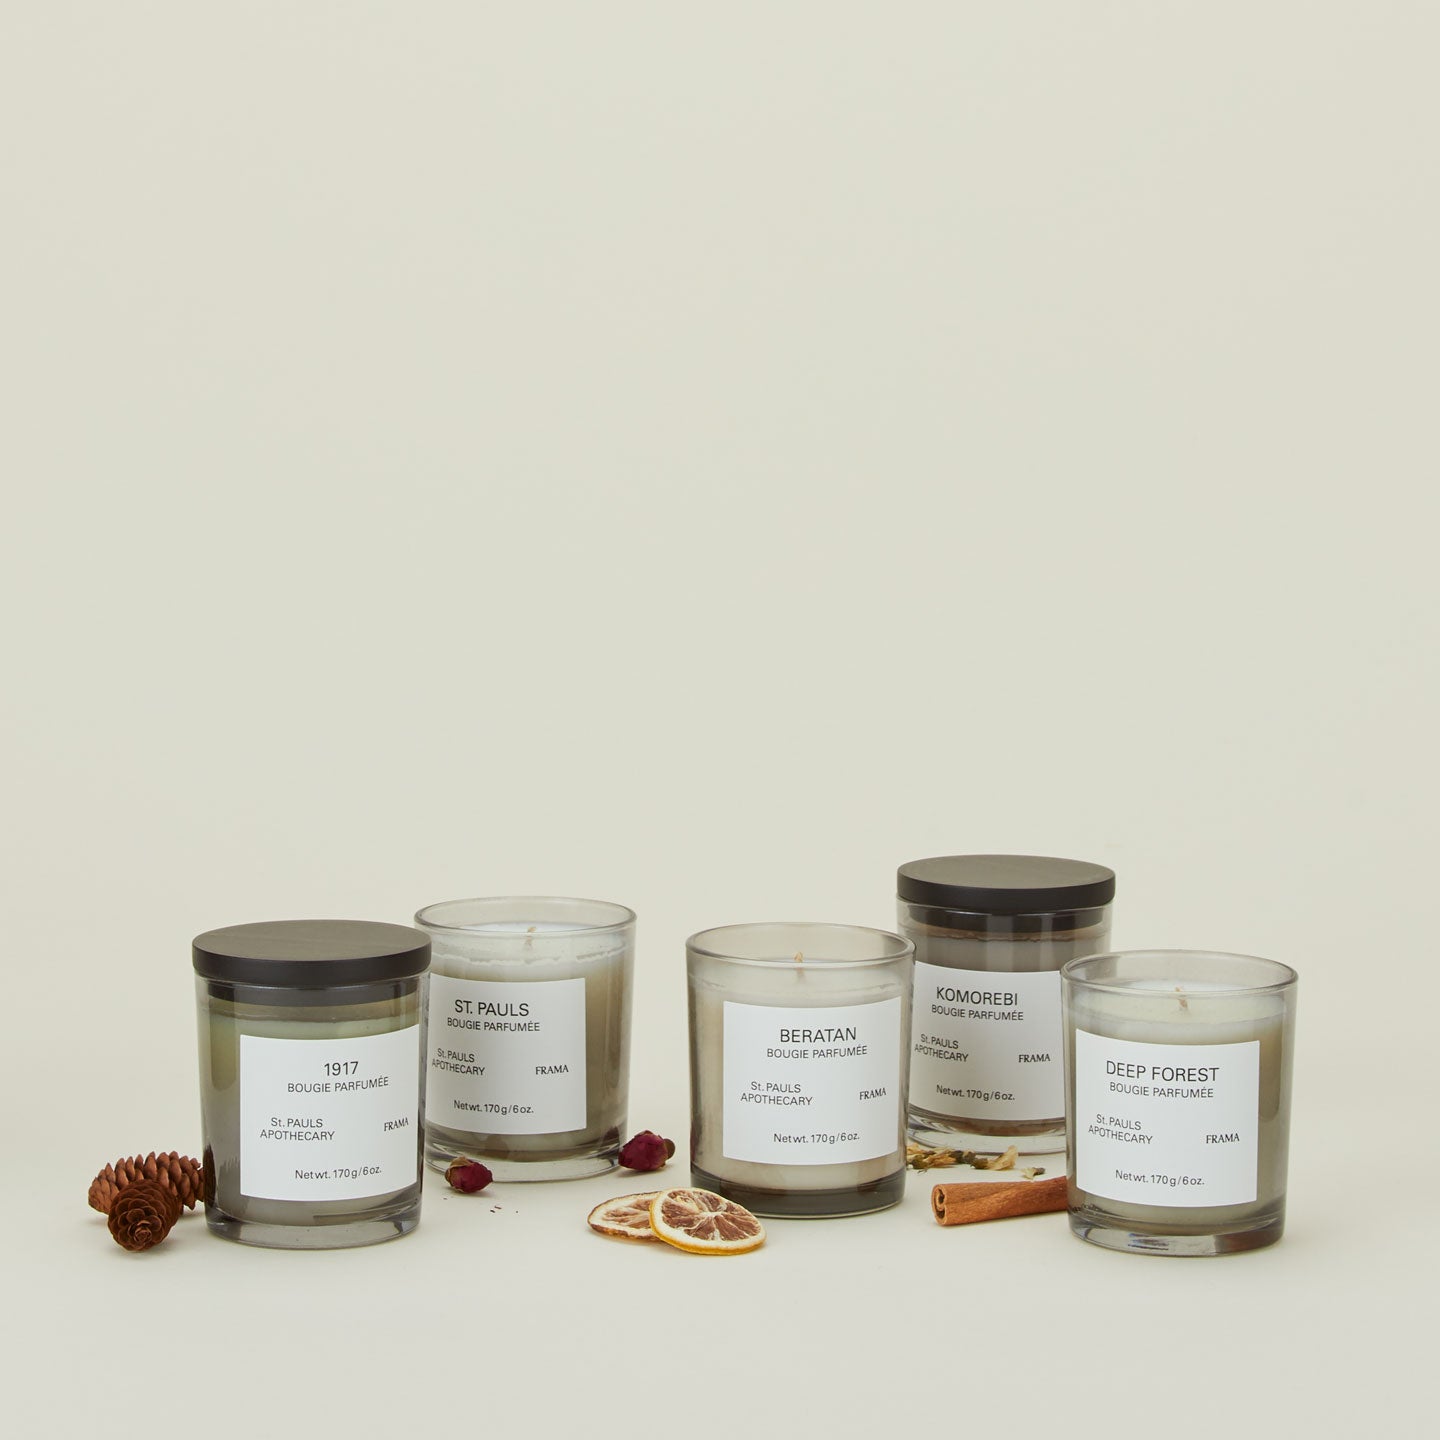 A group of wax scented candles with dry flora, fruit, and spices.